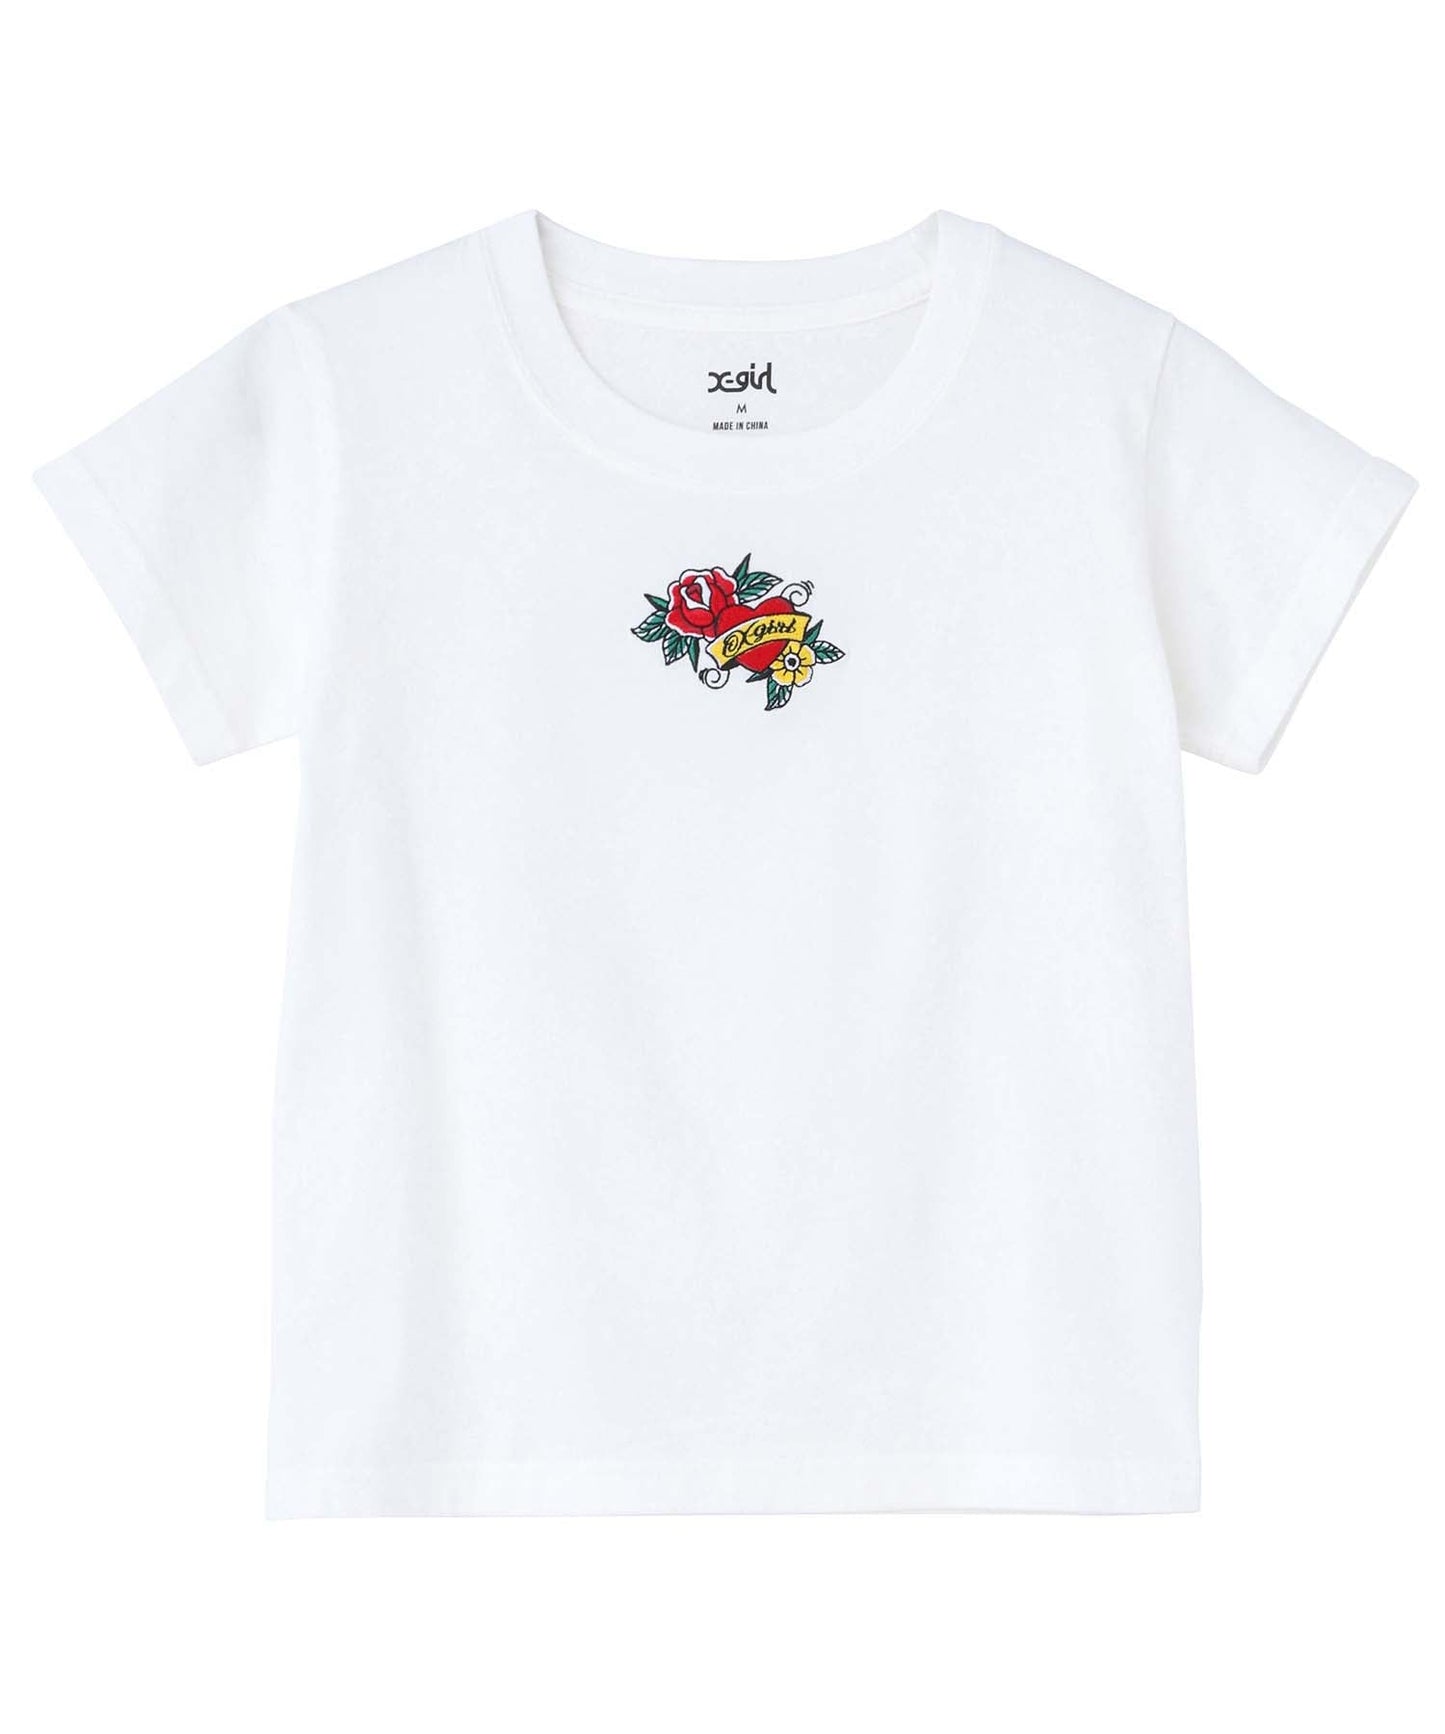 ROSE HEART EMBROIDERY S/S BABY TEE